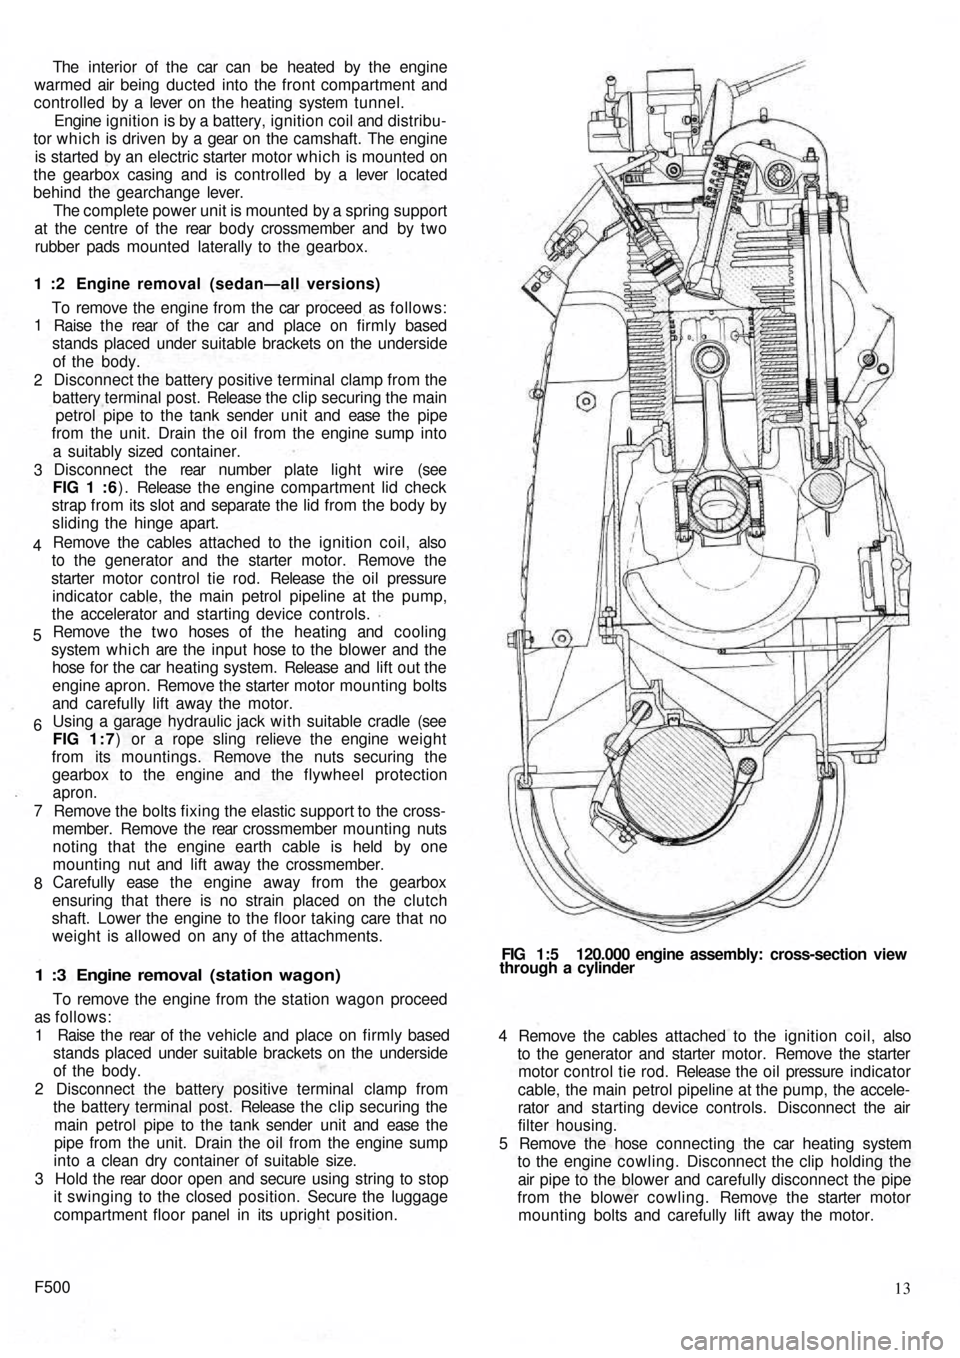 FIAT 500 1967 1.G Workshop Manual The  interior of the  car can  be heated by the engine
warmed air being ducted into the front compartment and
controlled  by a  lever on the heating system tunnel.
Engine ignition is by a battery, ign